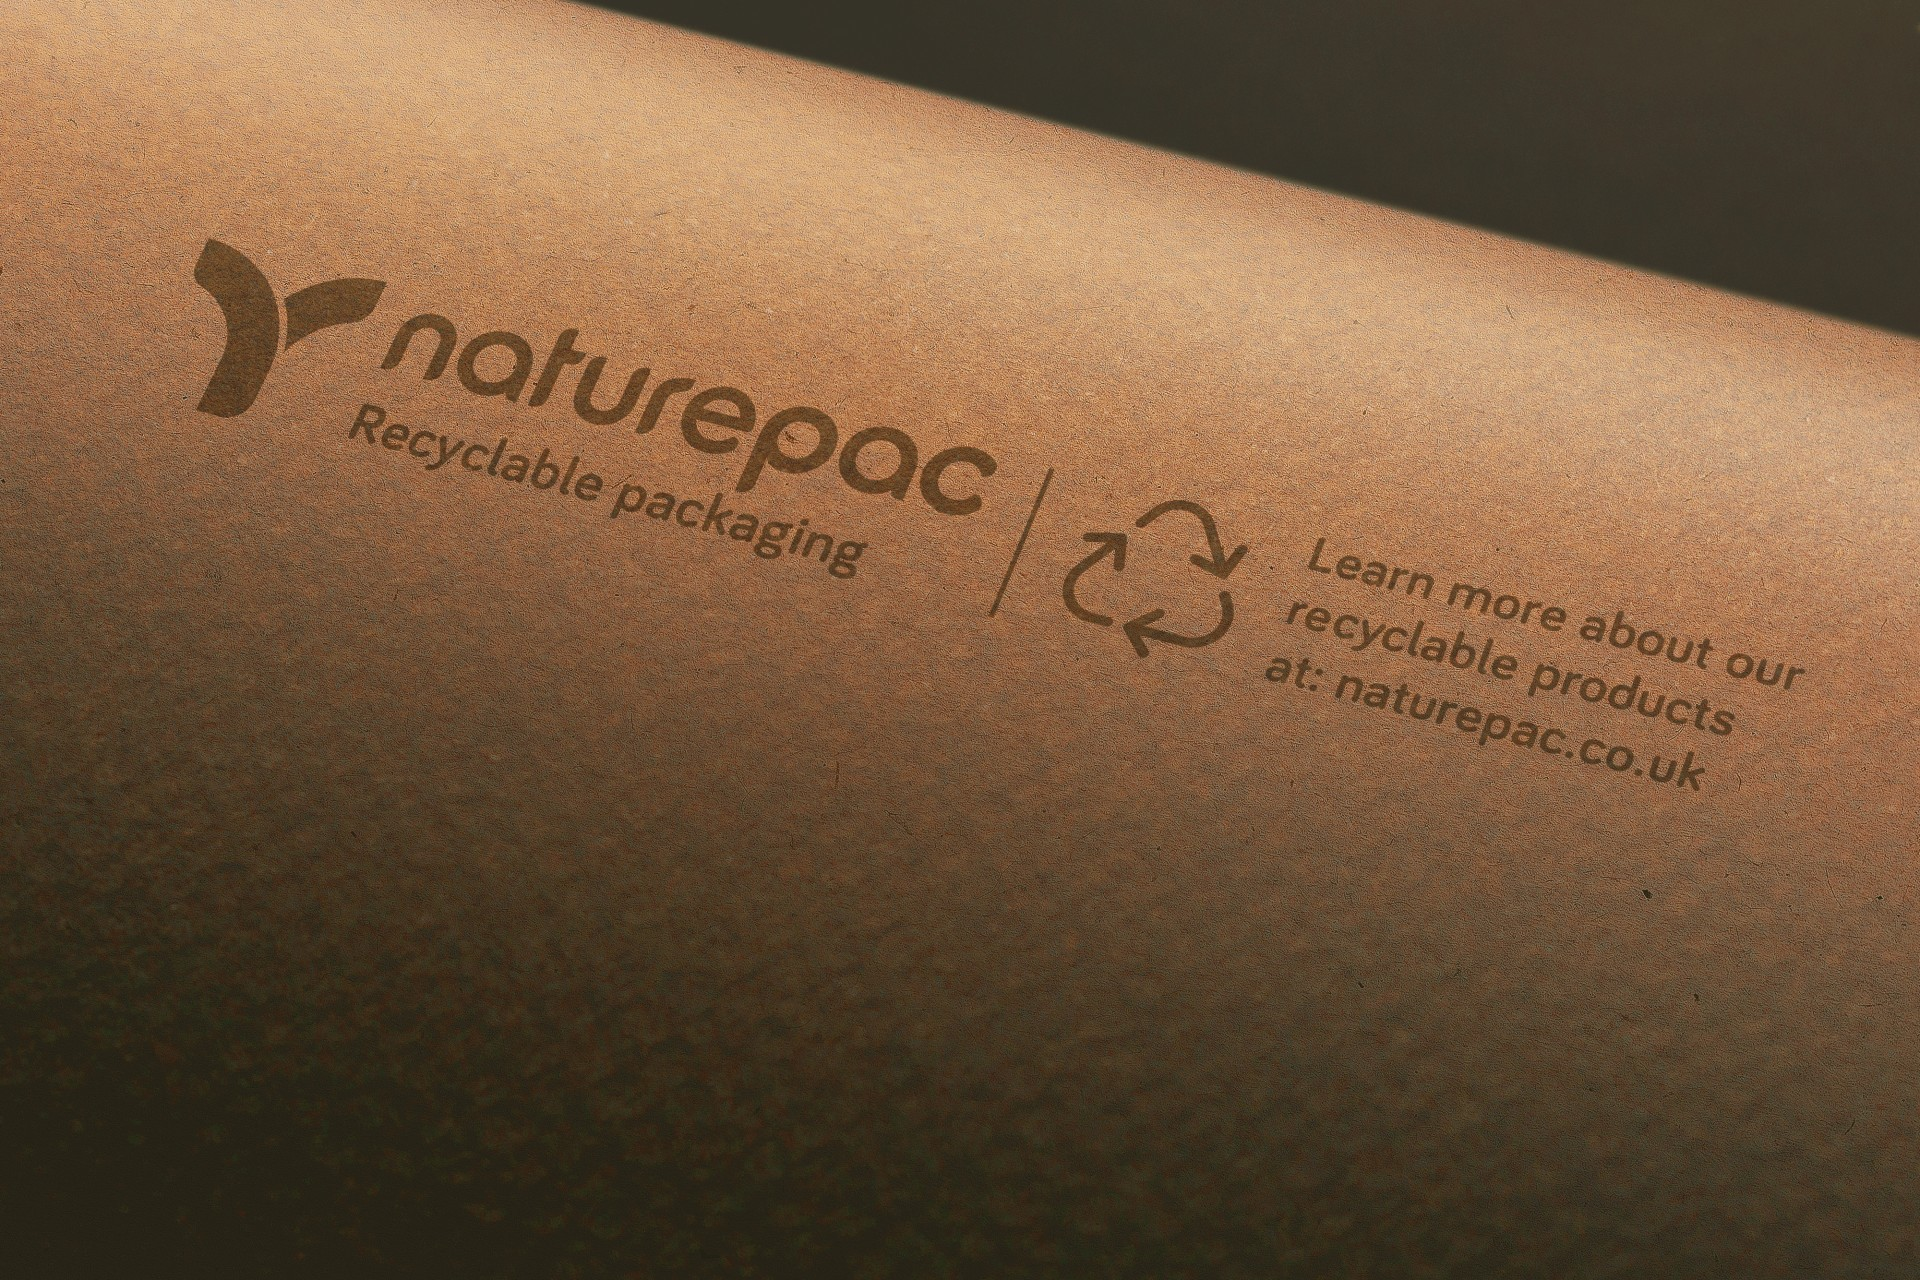 Brand design for Naturepac by The Armoury